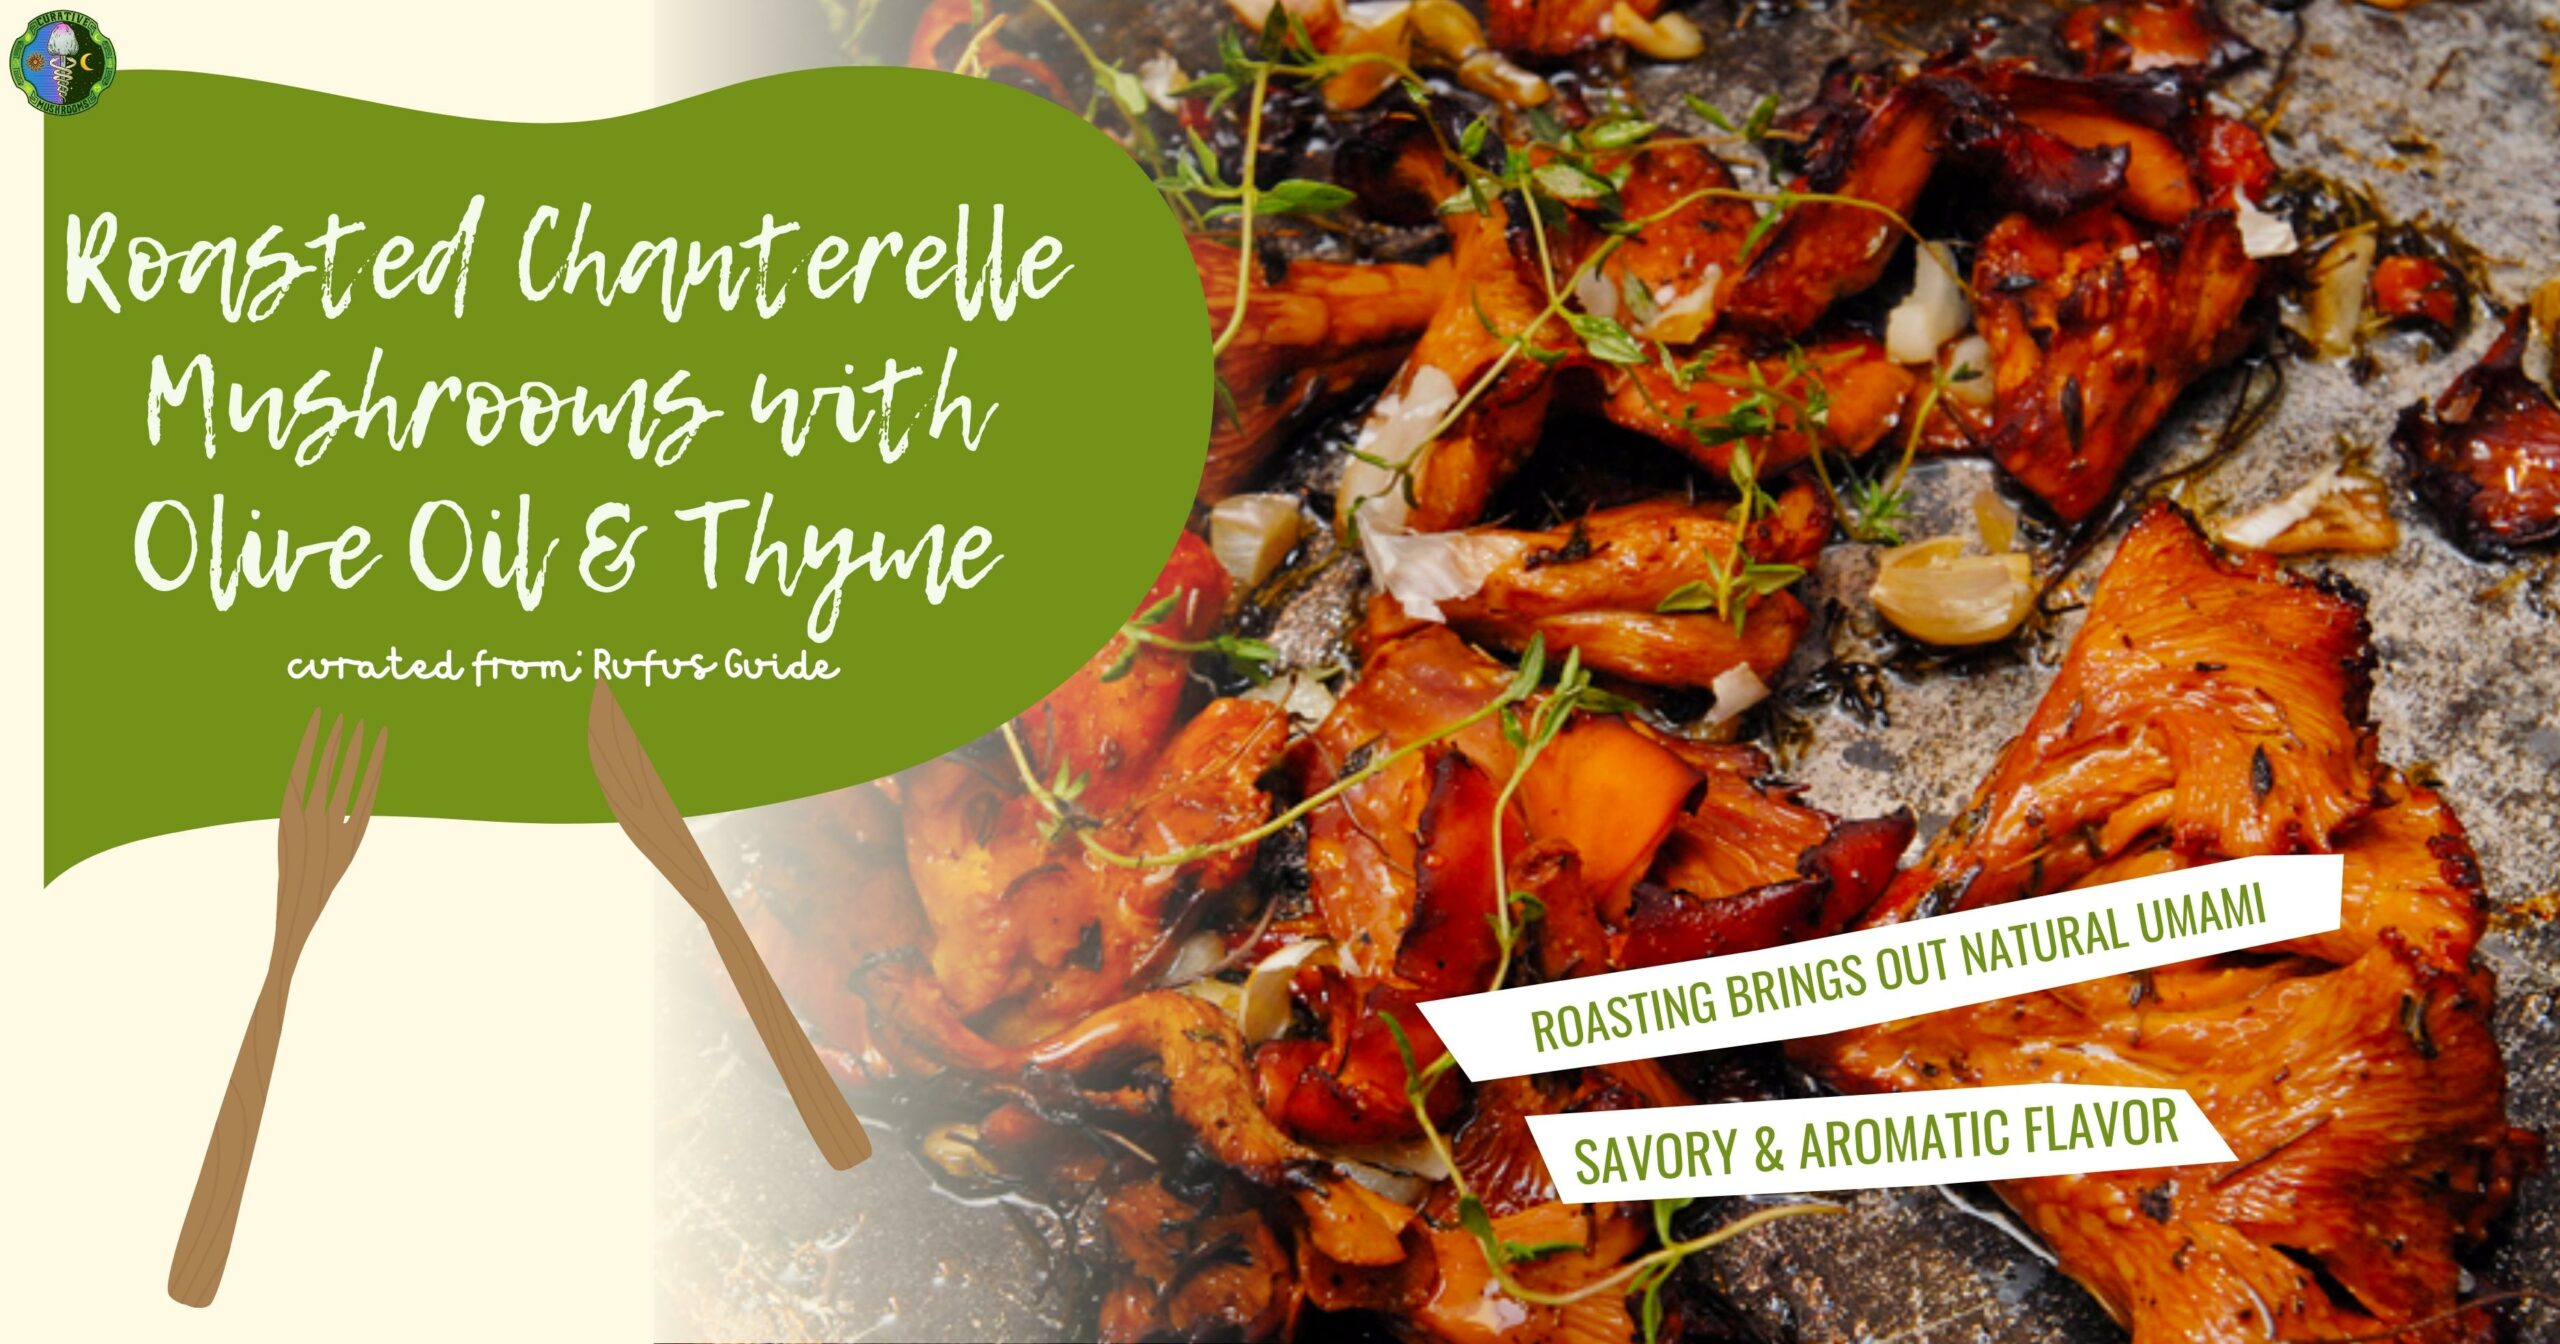 Roasted Chanterelle Mushrooms with Olive Oil & Thyme